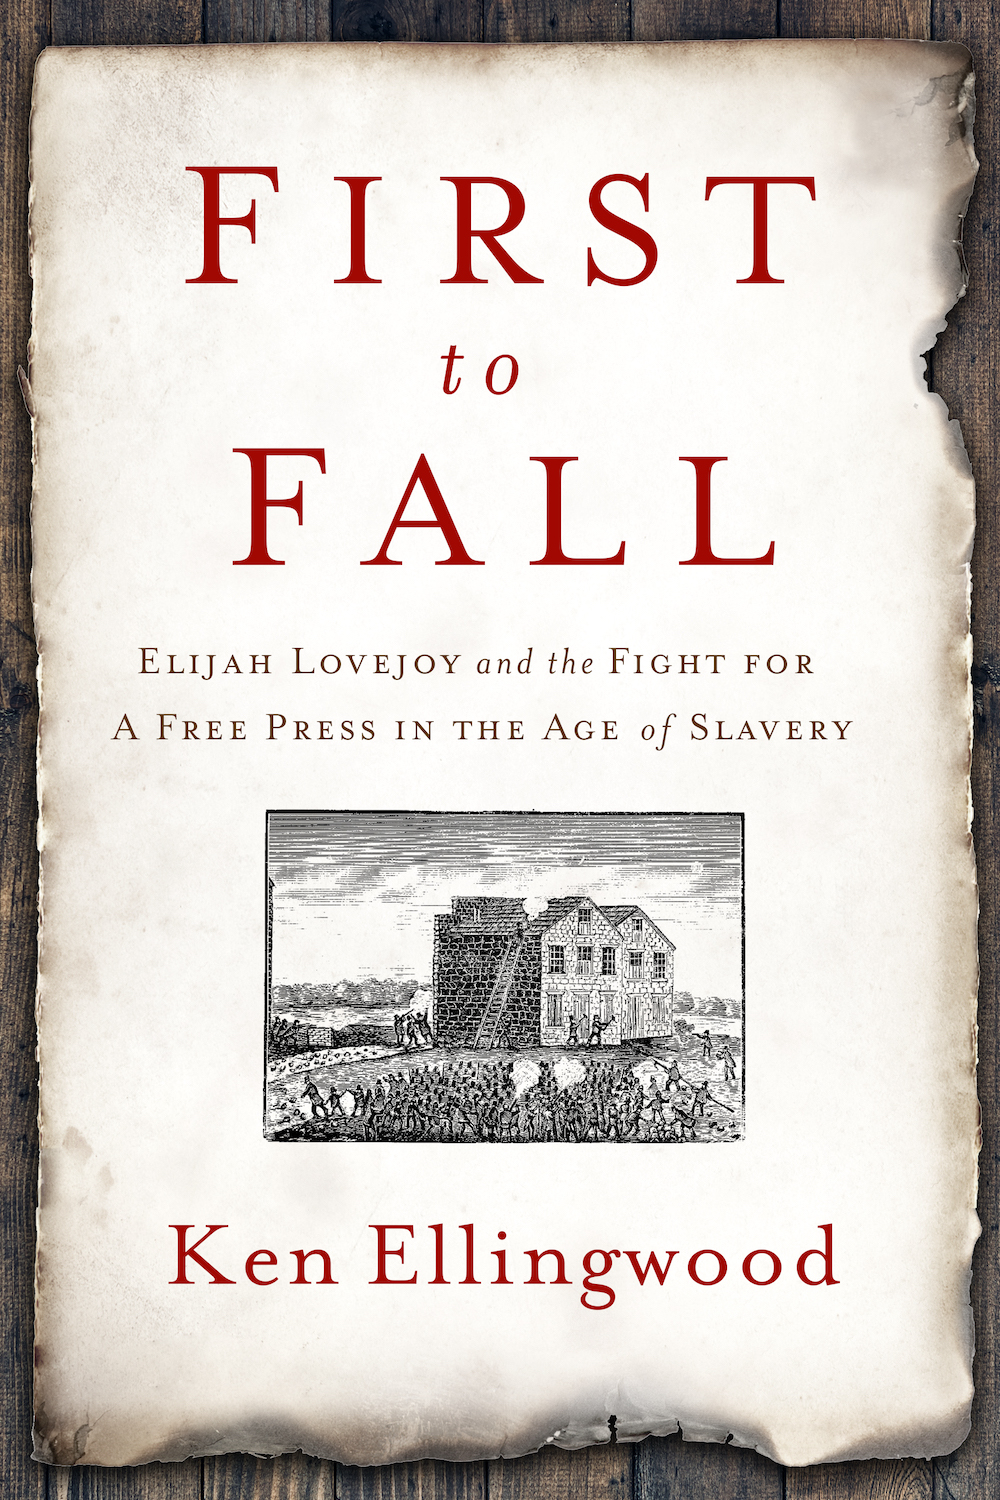 "First to Fall: Elijah Lovejoy and the Fight for a Free Press in the Age of Slavery" by Ken Ellingwood